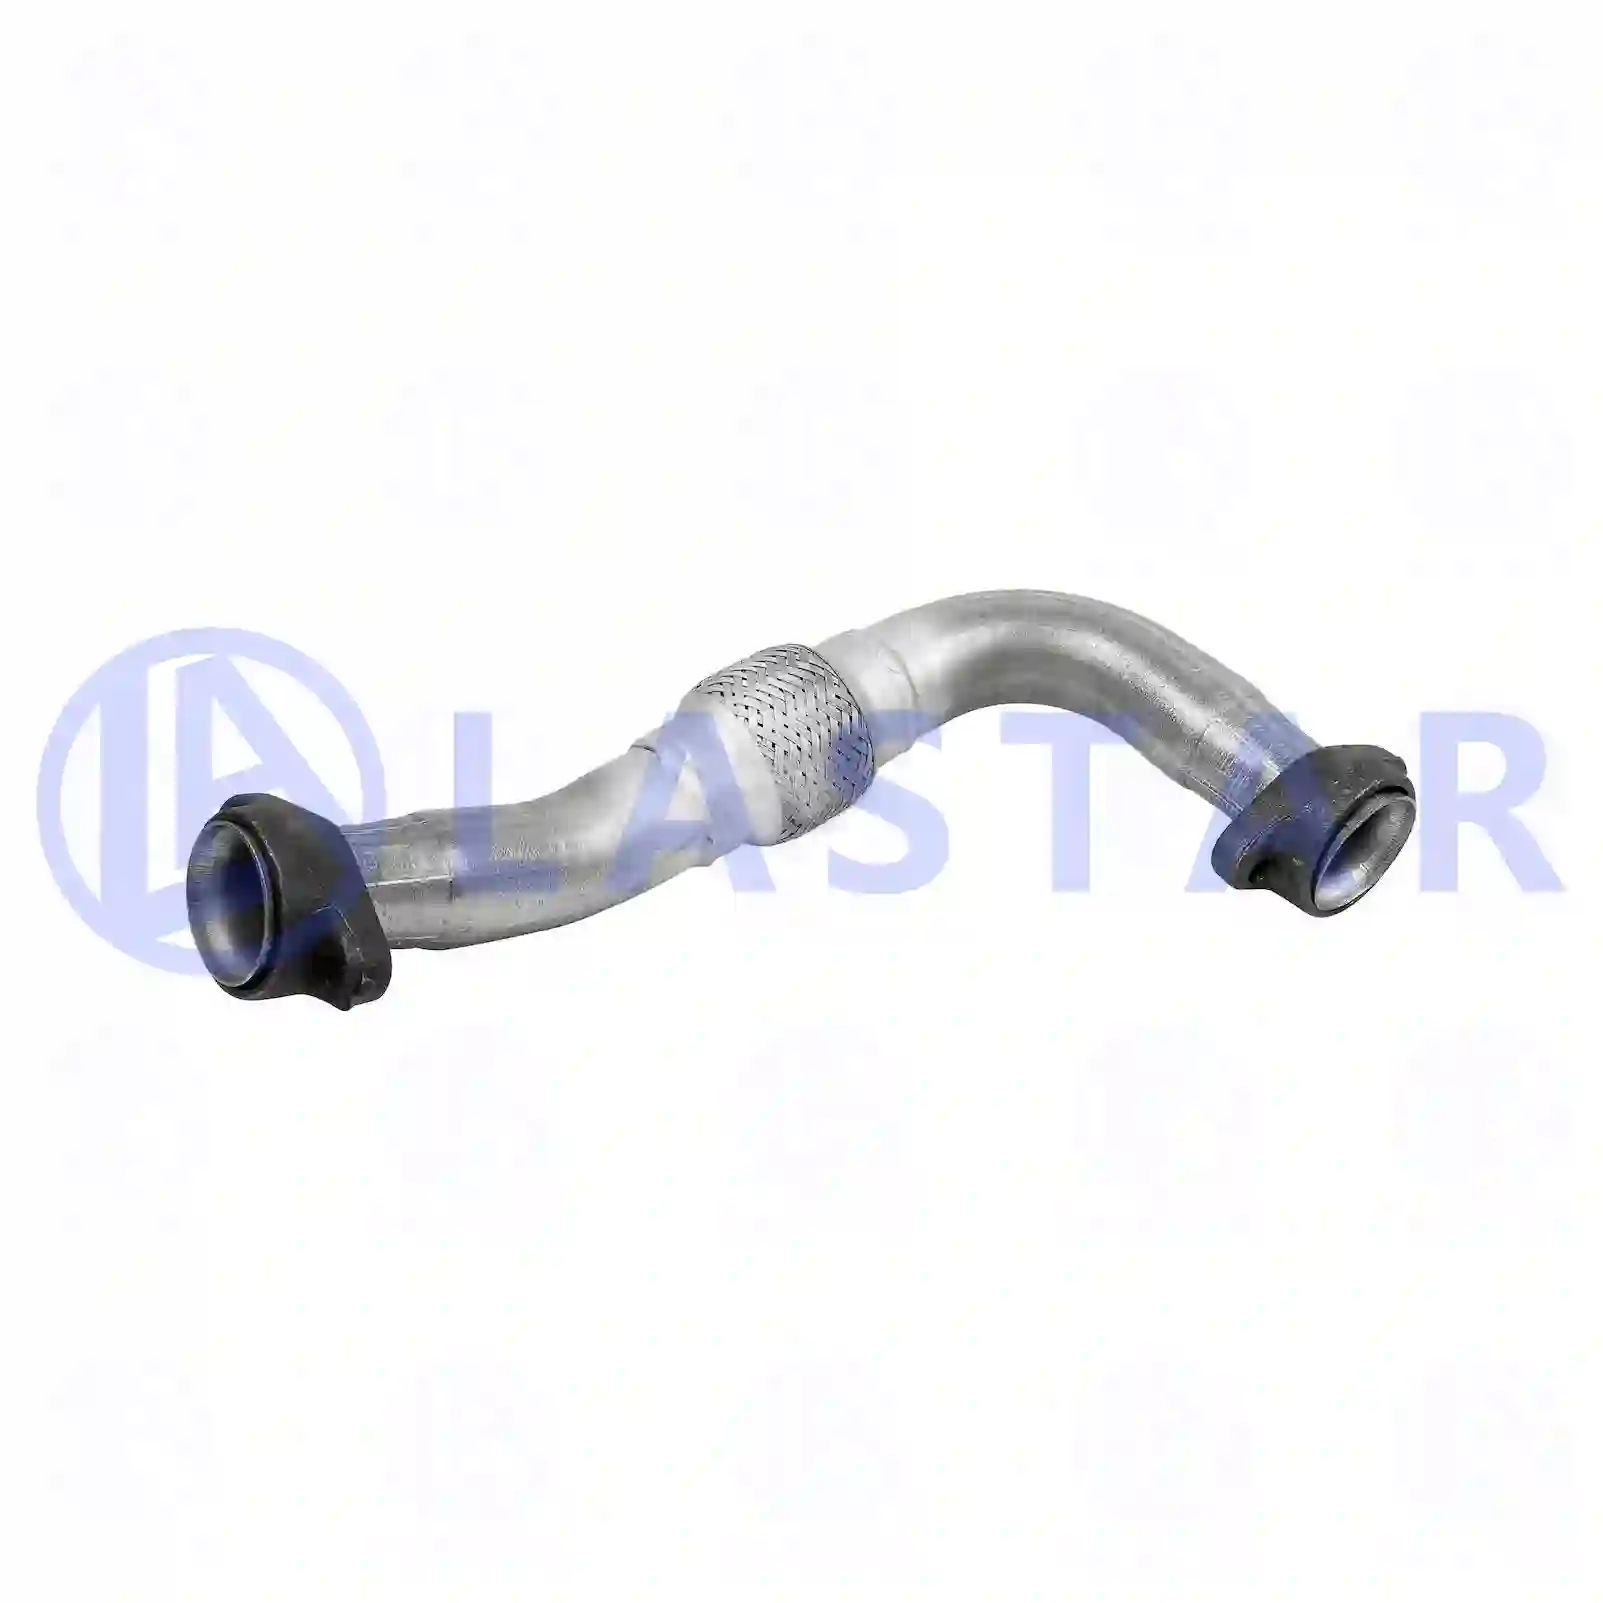 Exhaust manifold, 77702012, 5411401303, 54114 ||  77702012 Lastar Spare Part | Truck Spare Parts, Auotomotive Spare Parts Exhaust manifold, 77702012, 5411401303, 54114 ||  77702012 Lastar Spare Part | Truck Spare Parts, Auotomotive Spare Parts